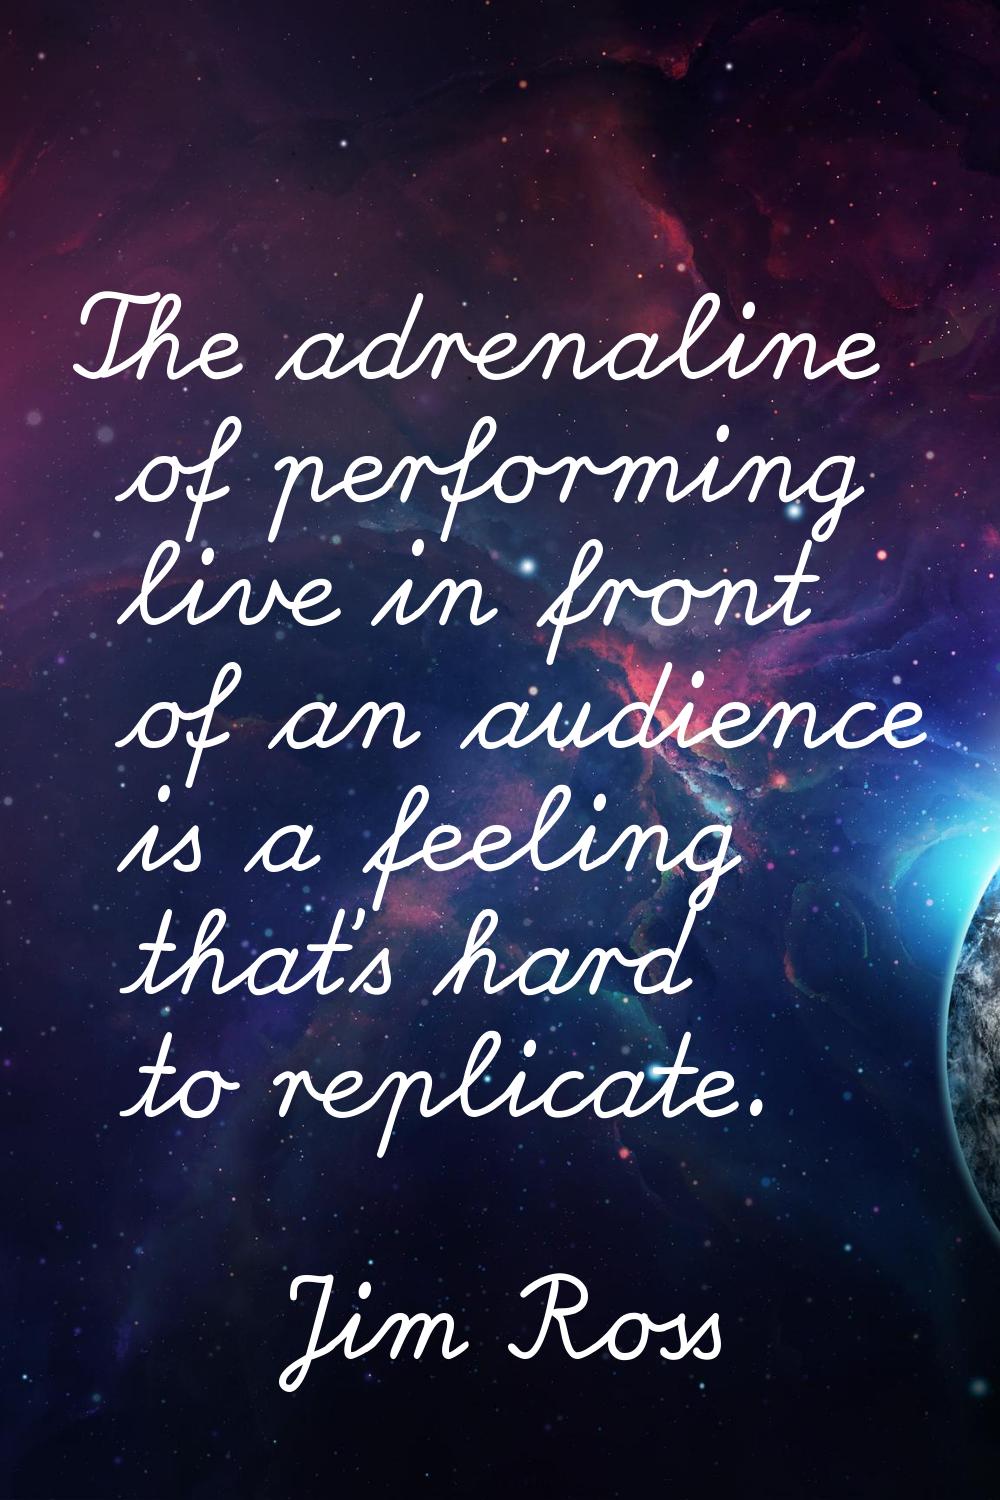 The adrenaline of performing live in front of an audience is a feeling that's hard to replicate.